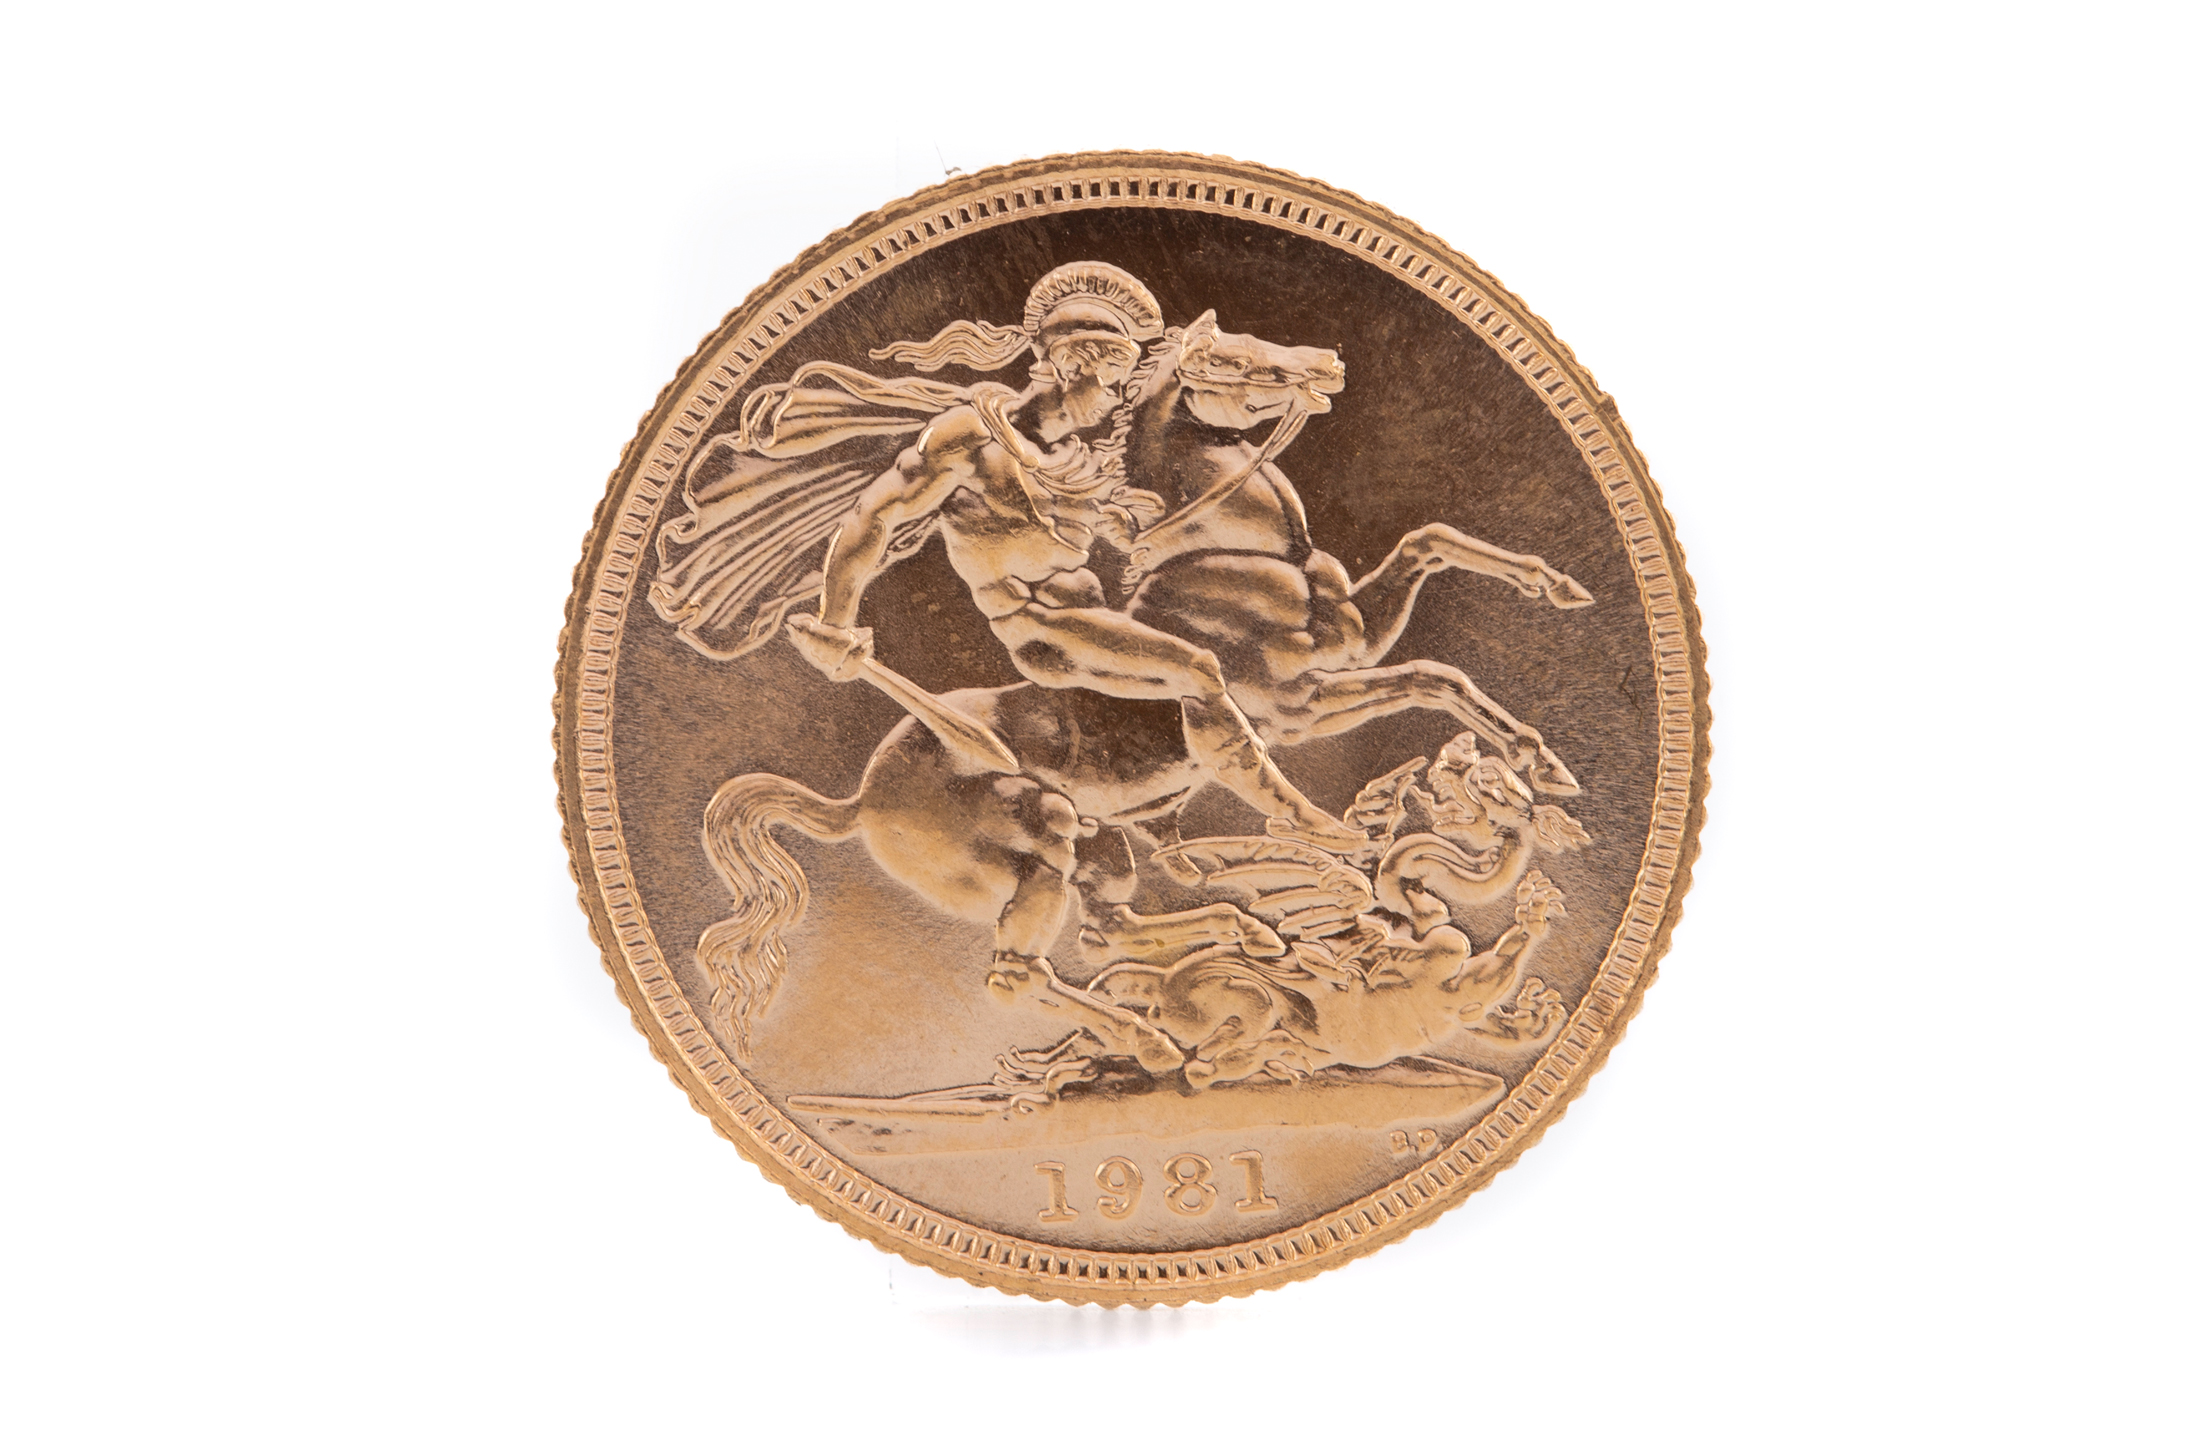 AN ELIZABETH II GOLD SOVEREIGN DATED 1981